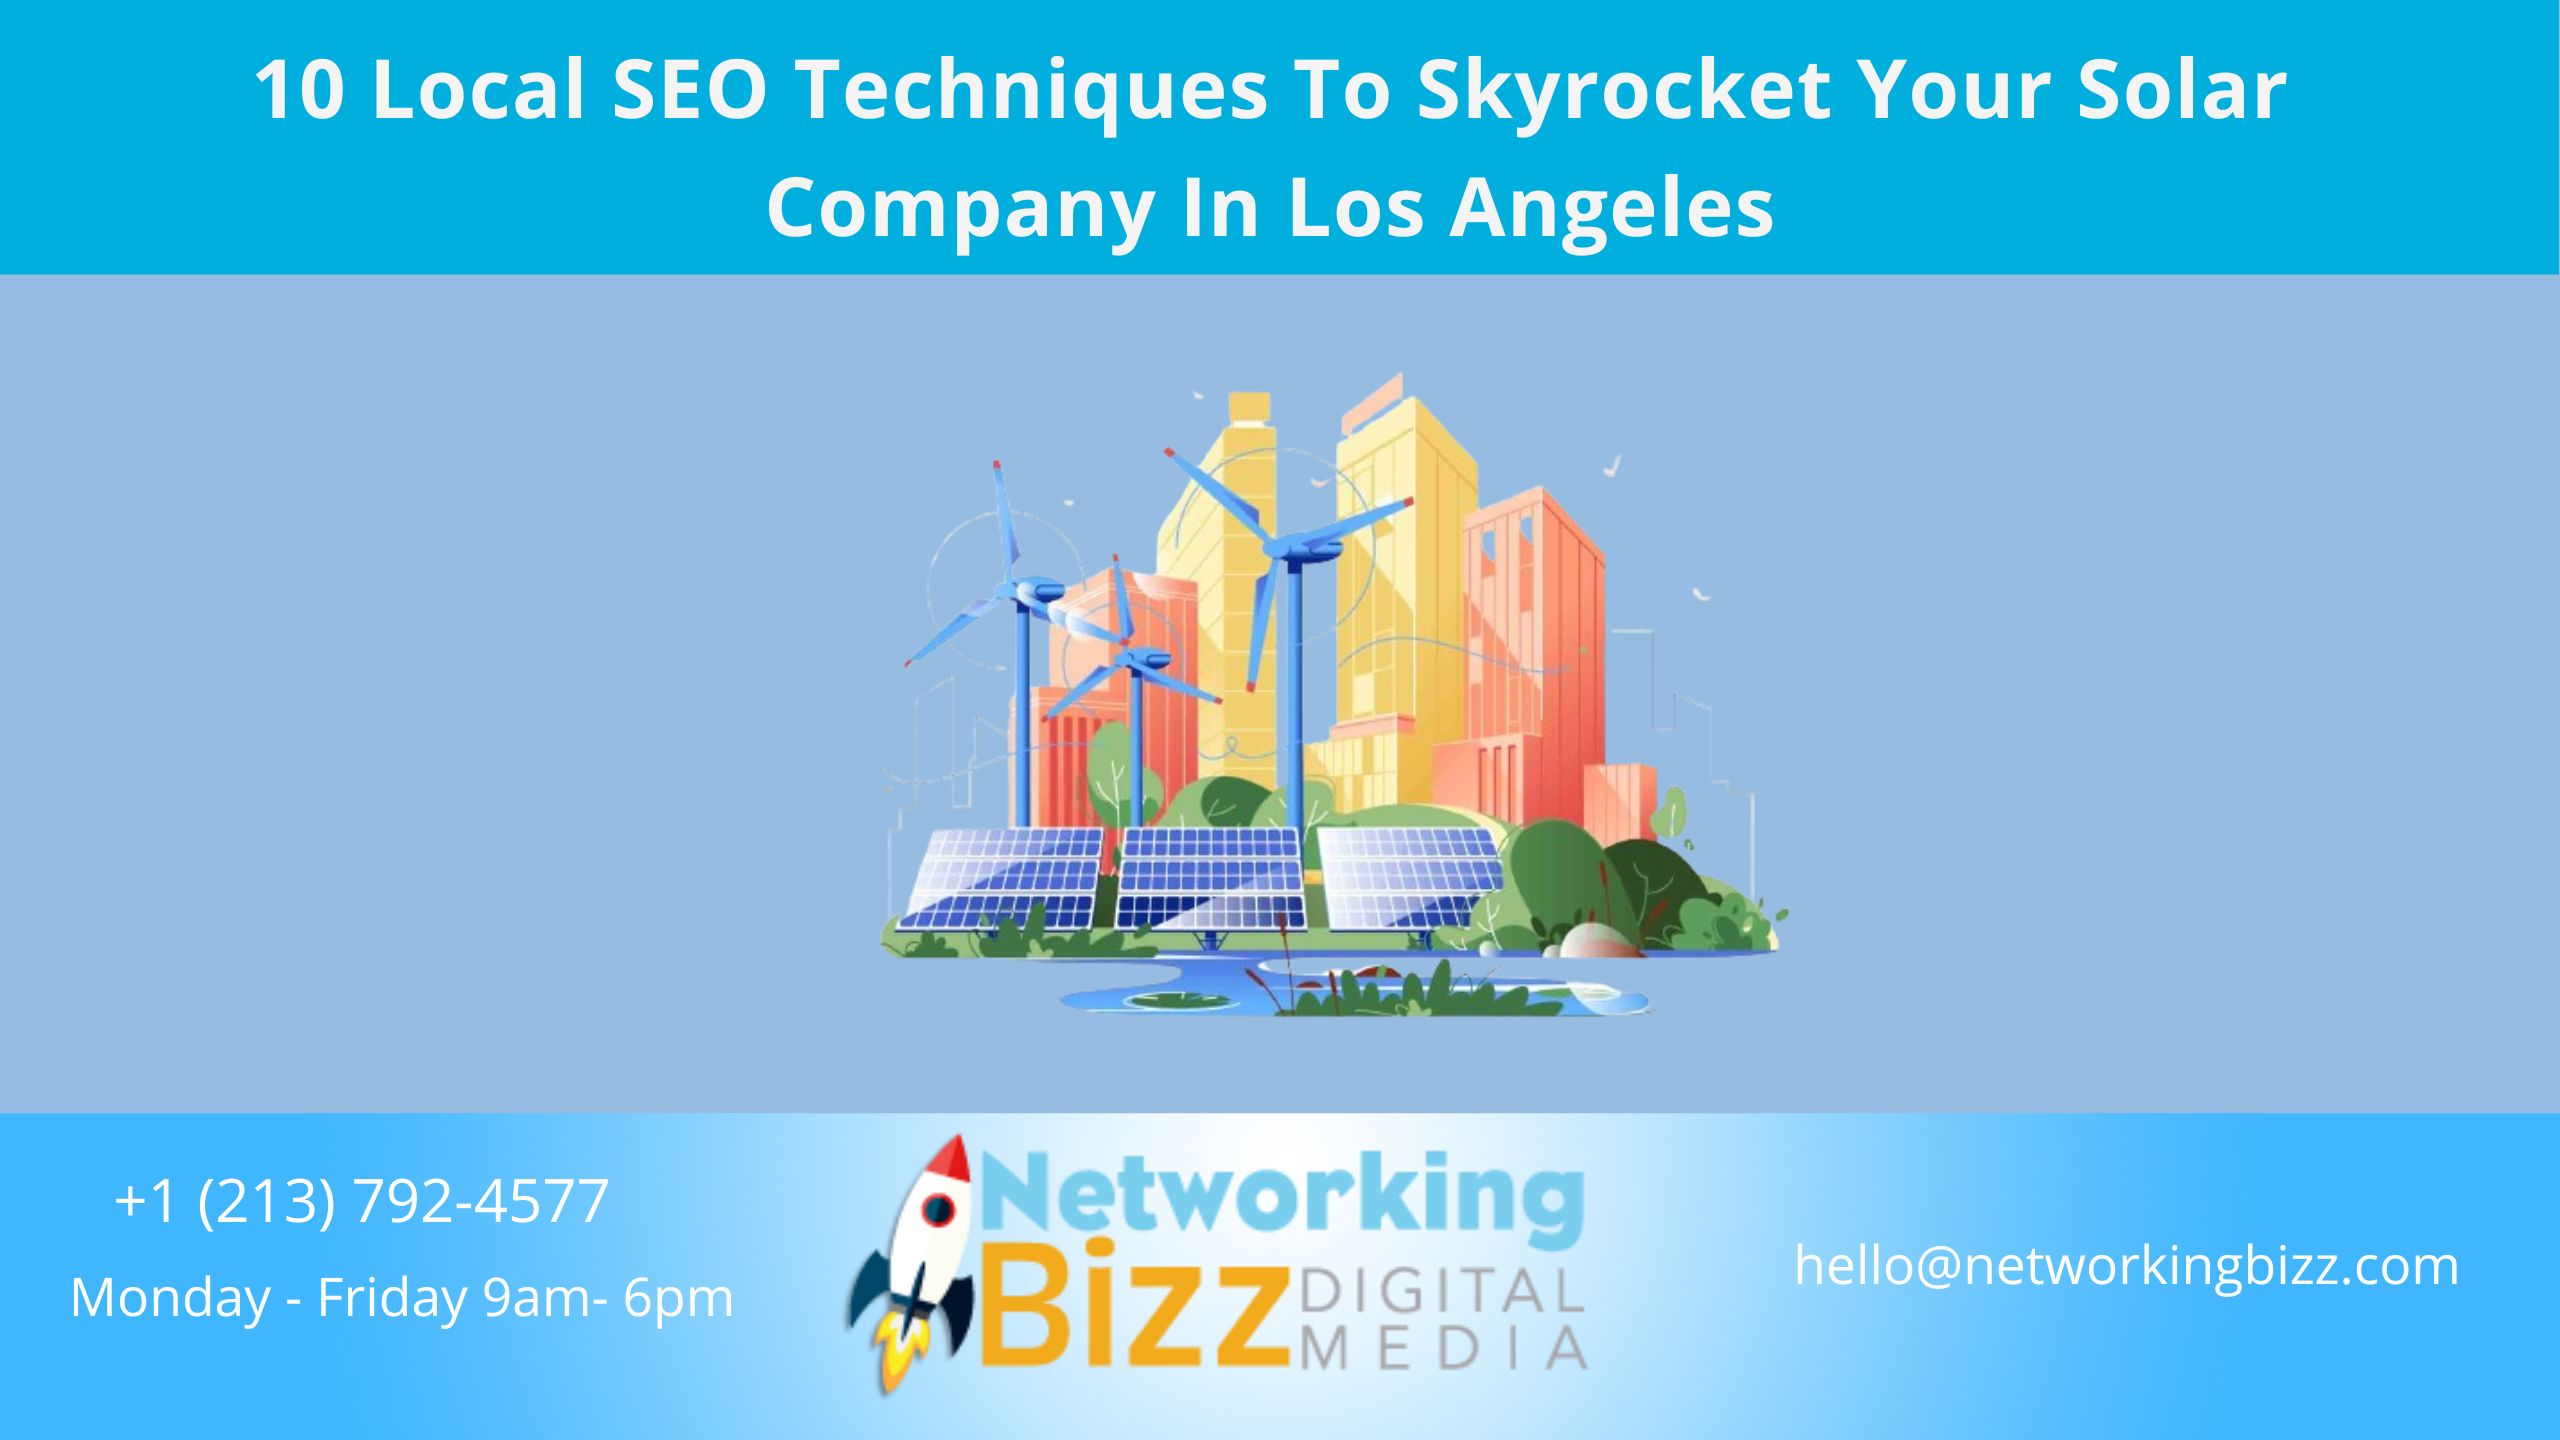 10 Local SEO Techniques To Skyrocket Your Solar Company In Los Angeles